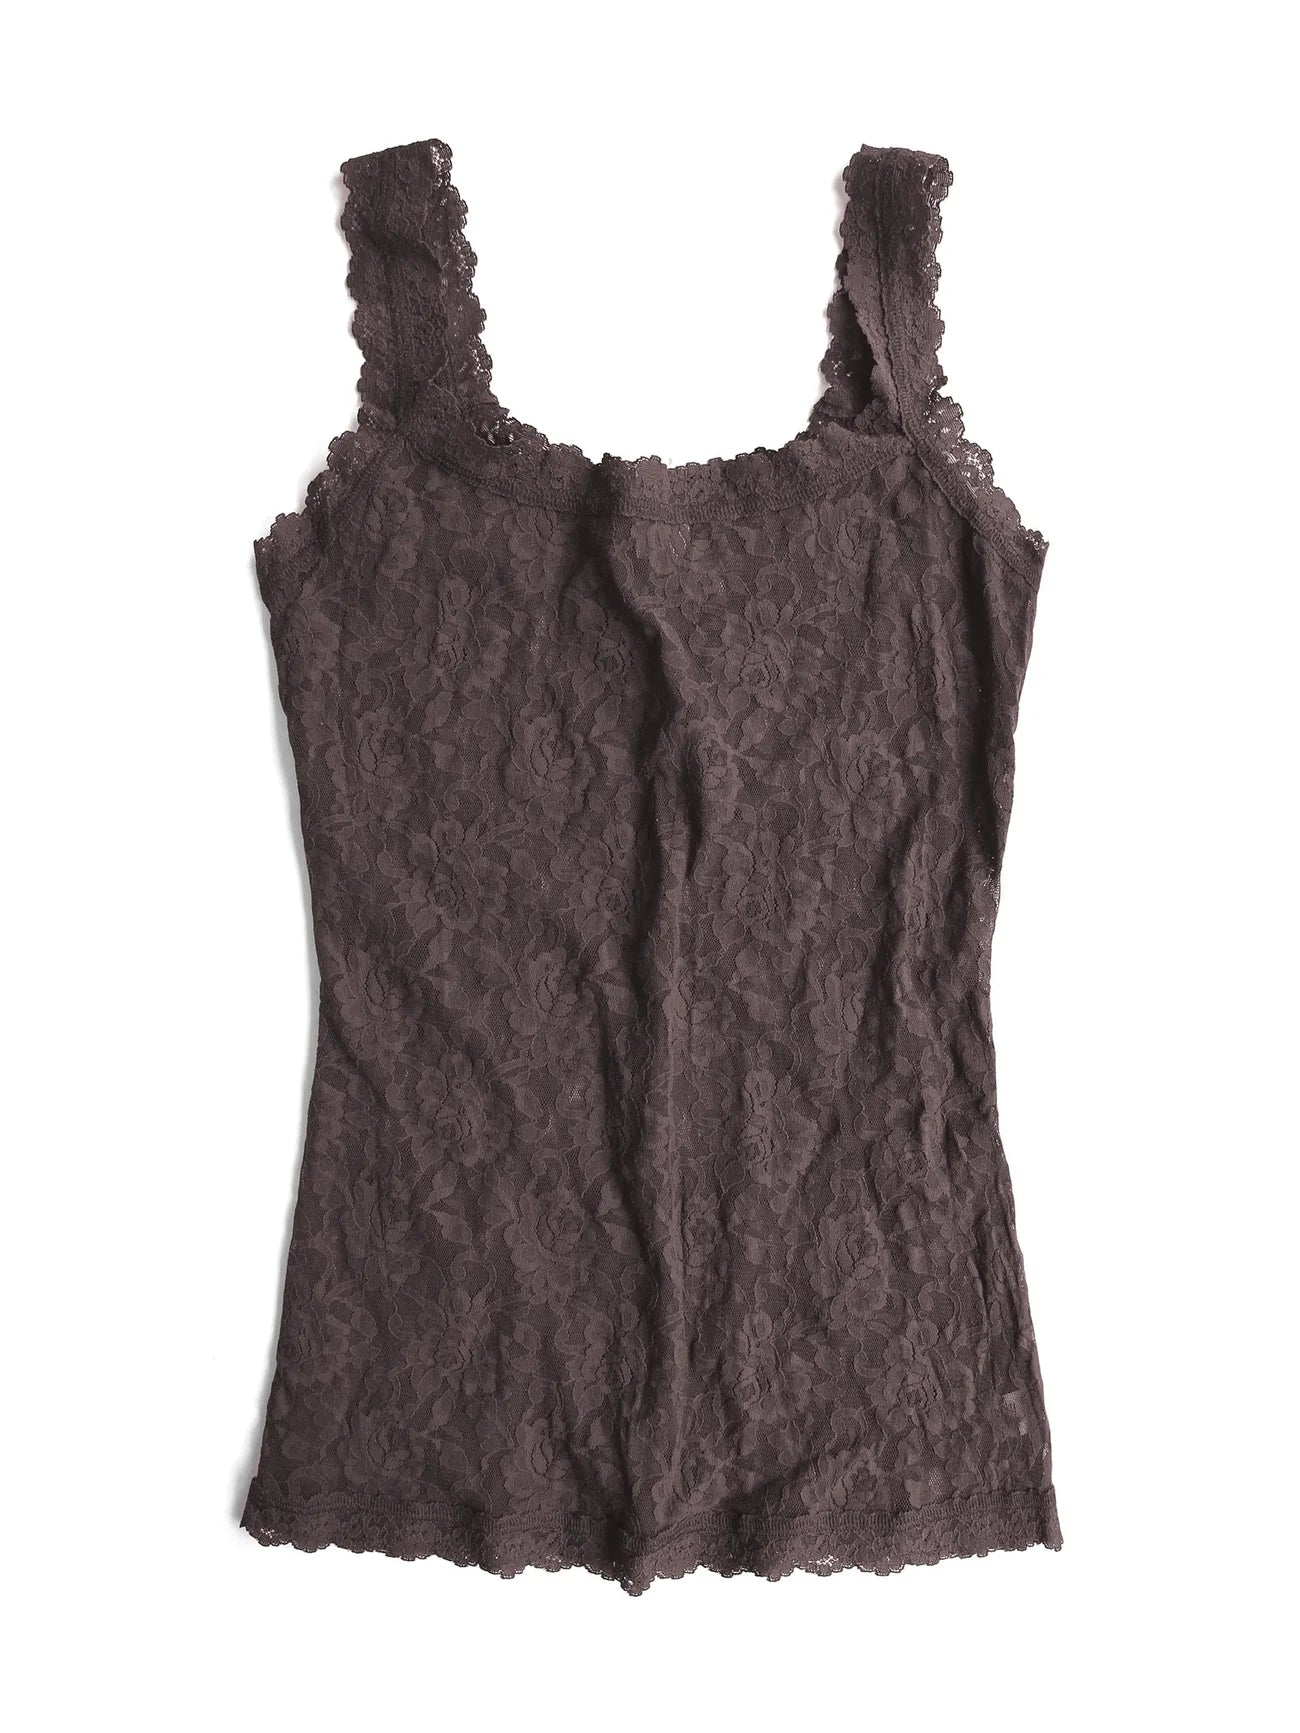 Hanky Panky Signature Lace Classic Camisole in Chai